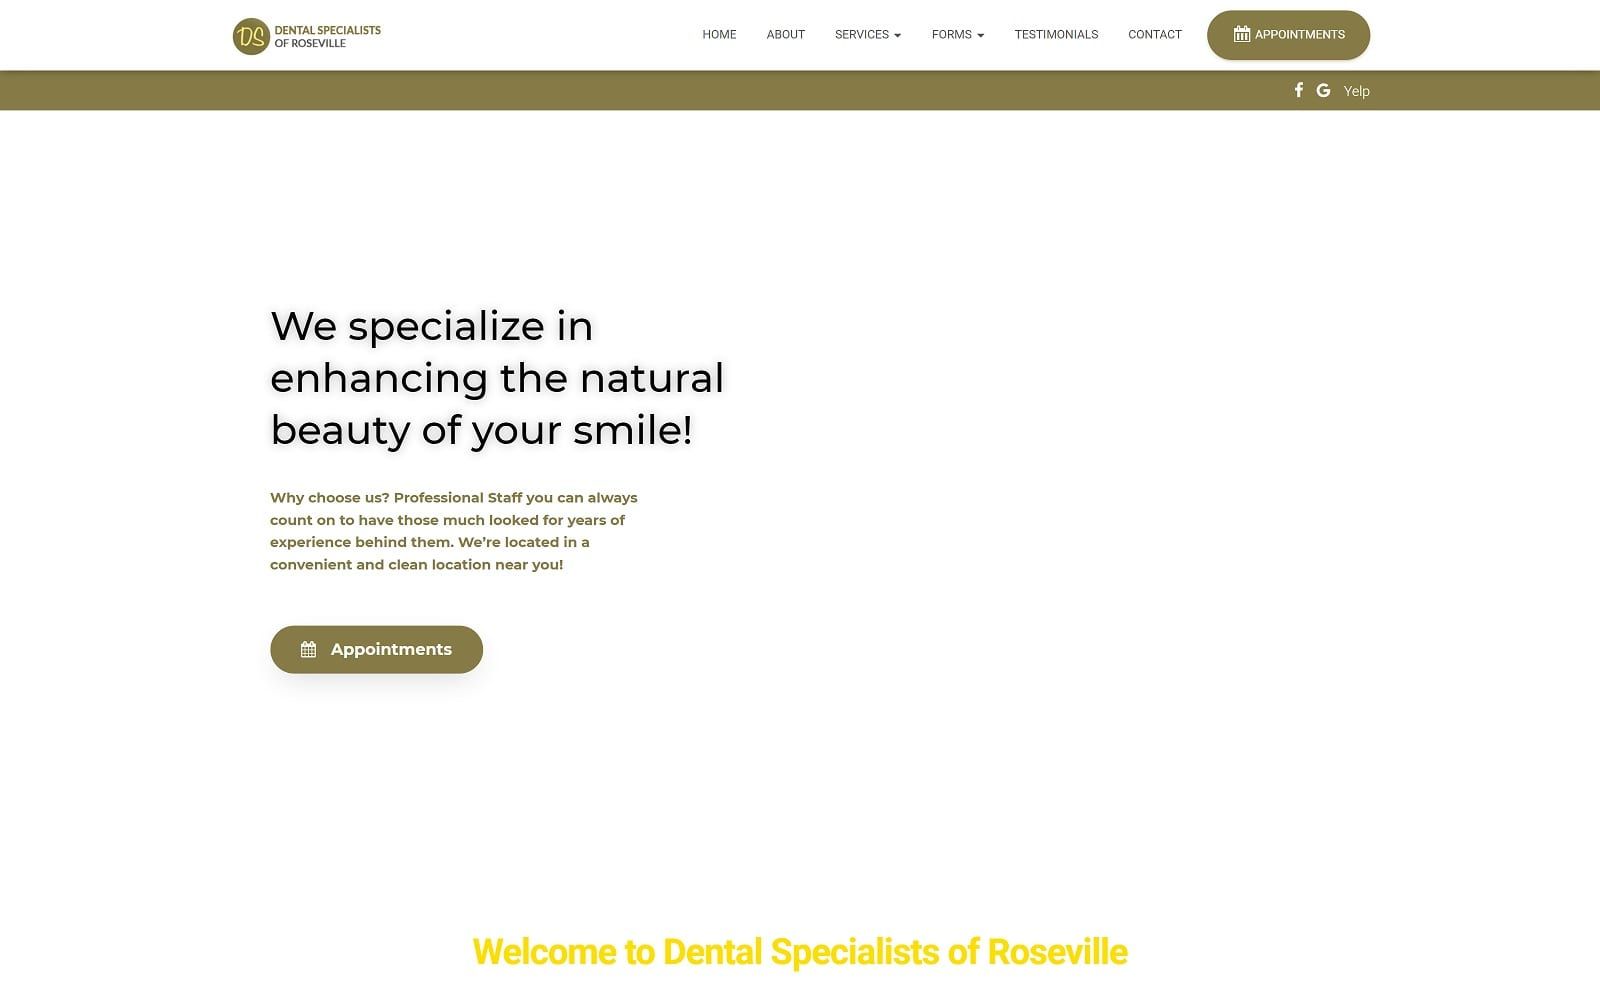 The screenshot of dental specialists of roseville dentalrosevillespecialists. Com website